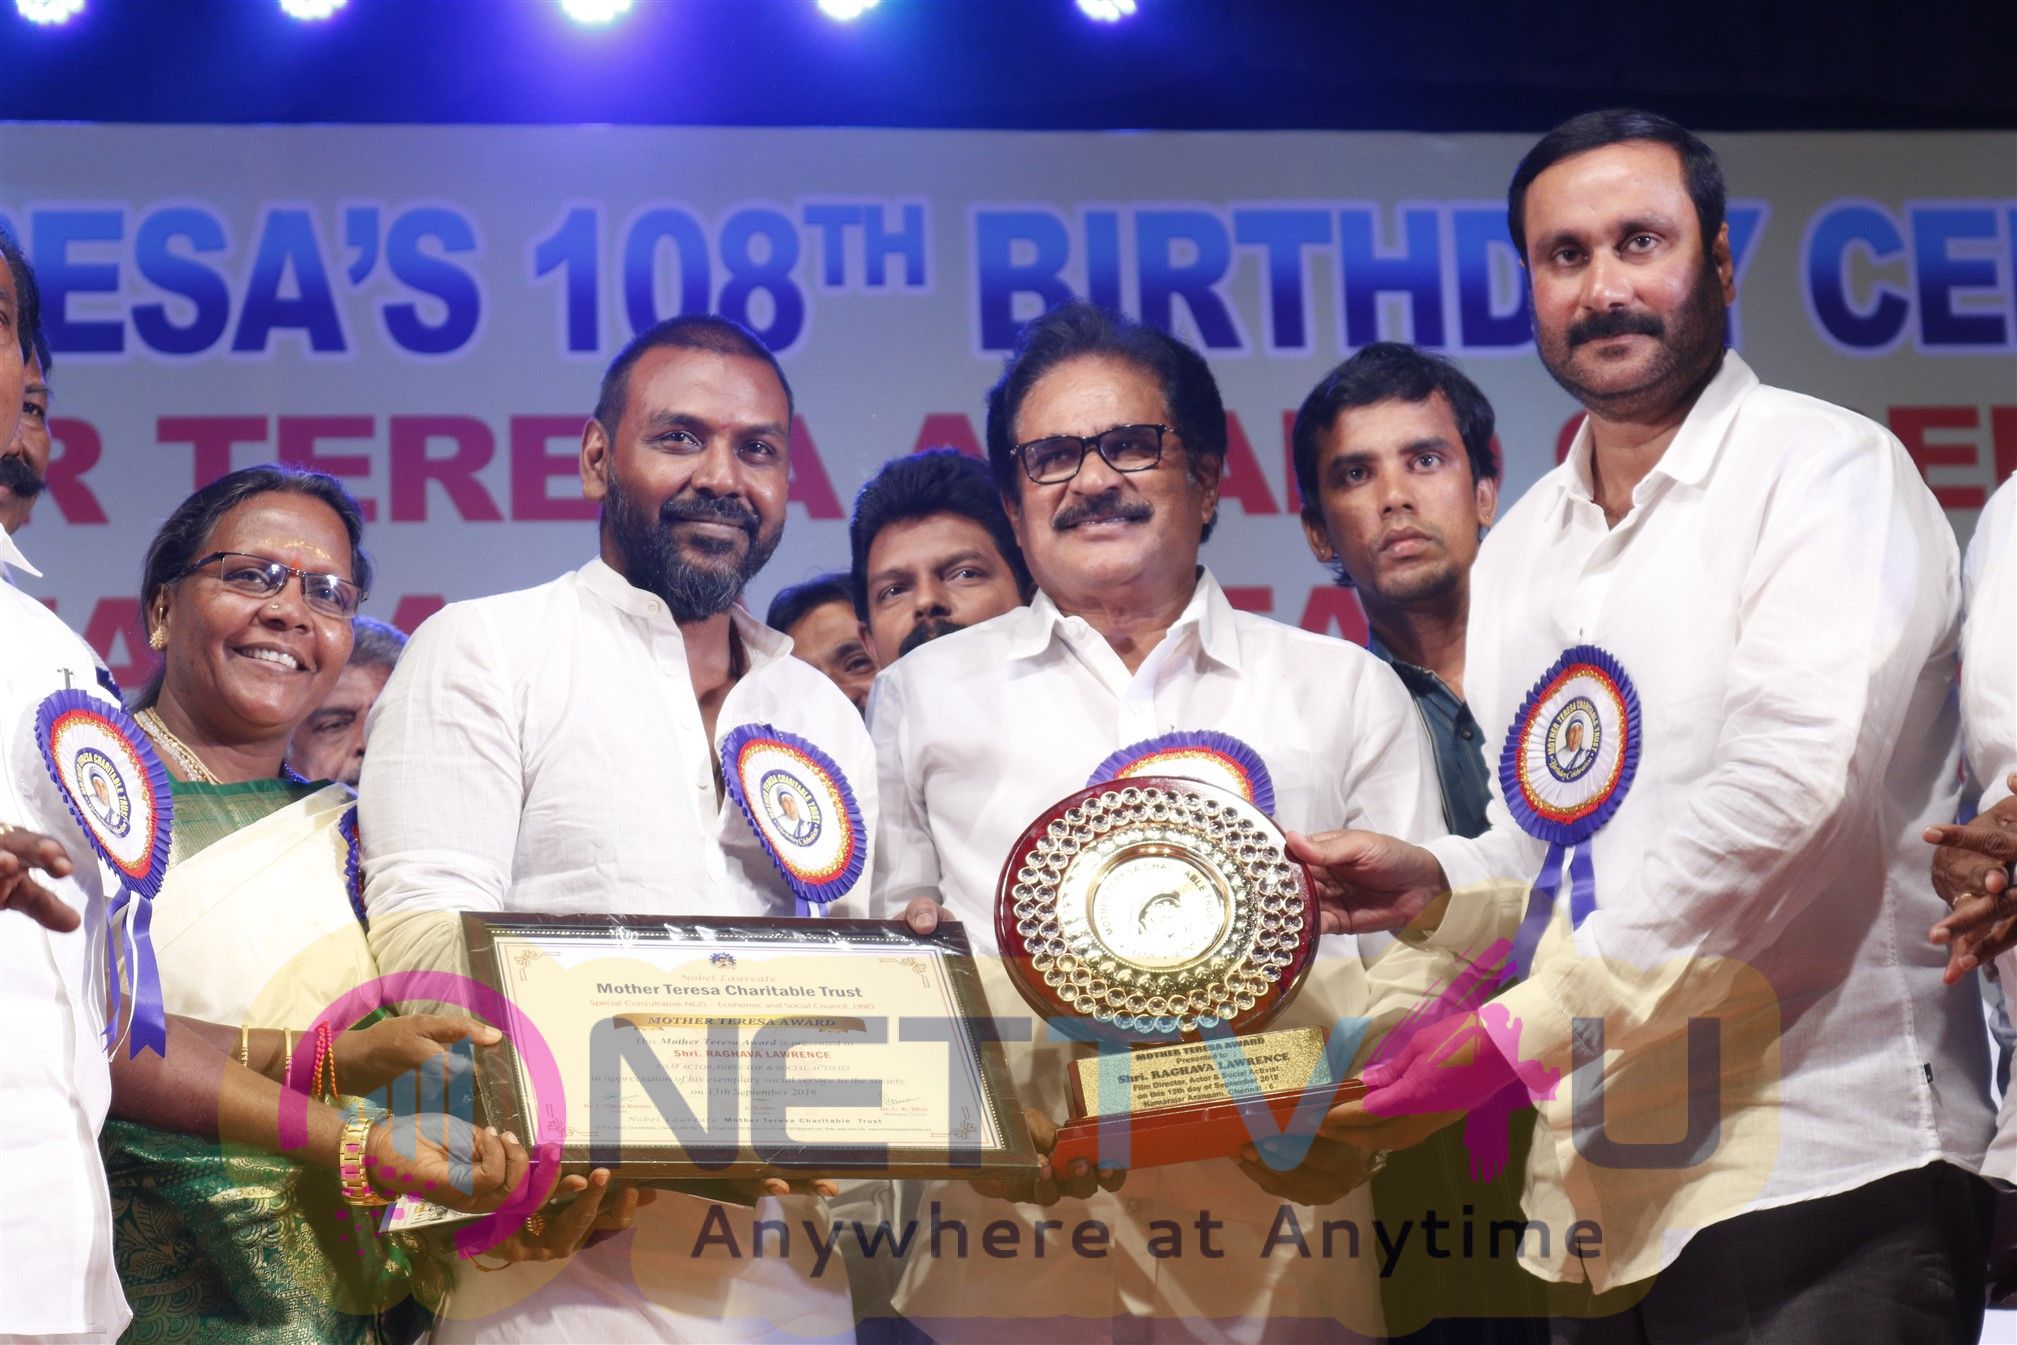 Mother Teresa On The Occasion Of The 108th Birthday Of Mother Teresa Was Awarded To Raghava Lawrence Tamil Gallery